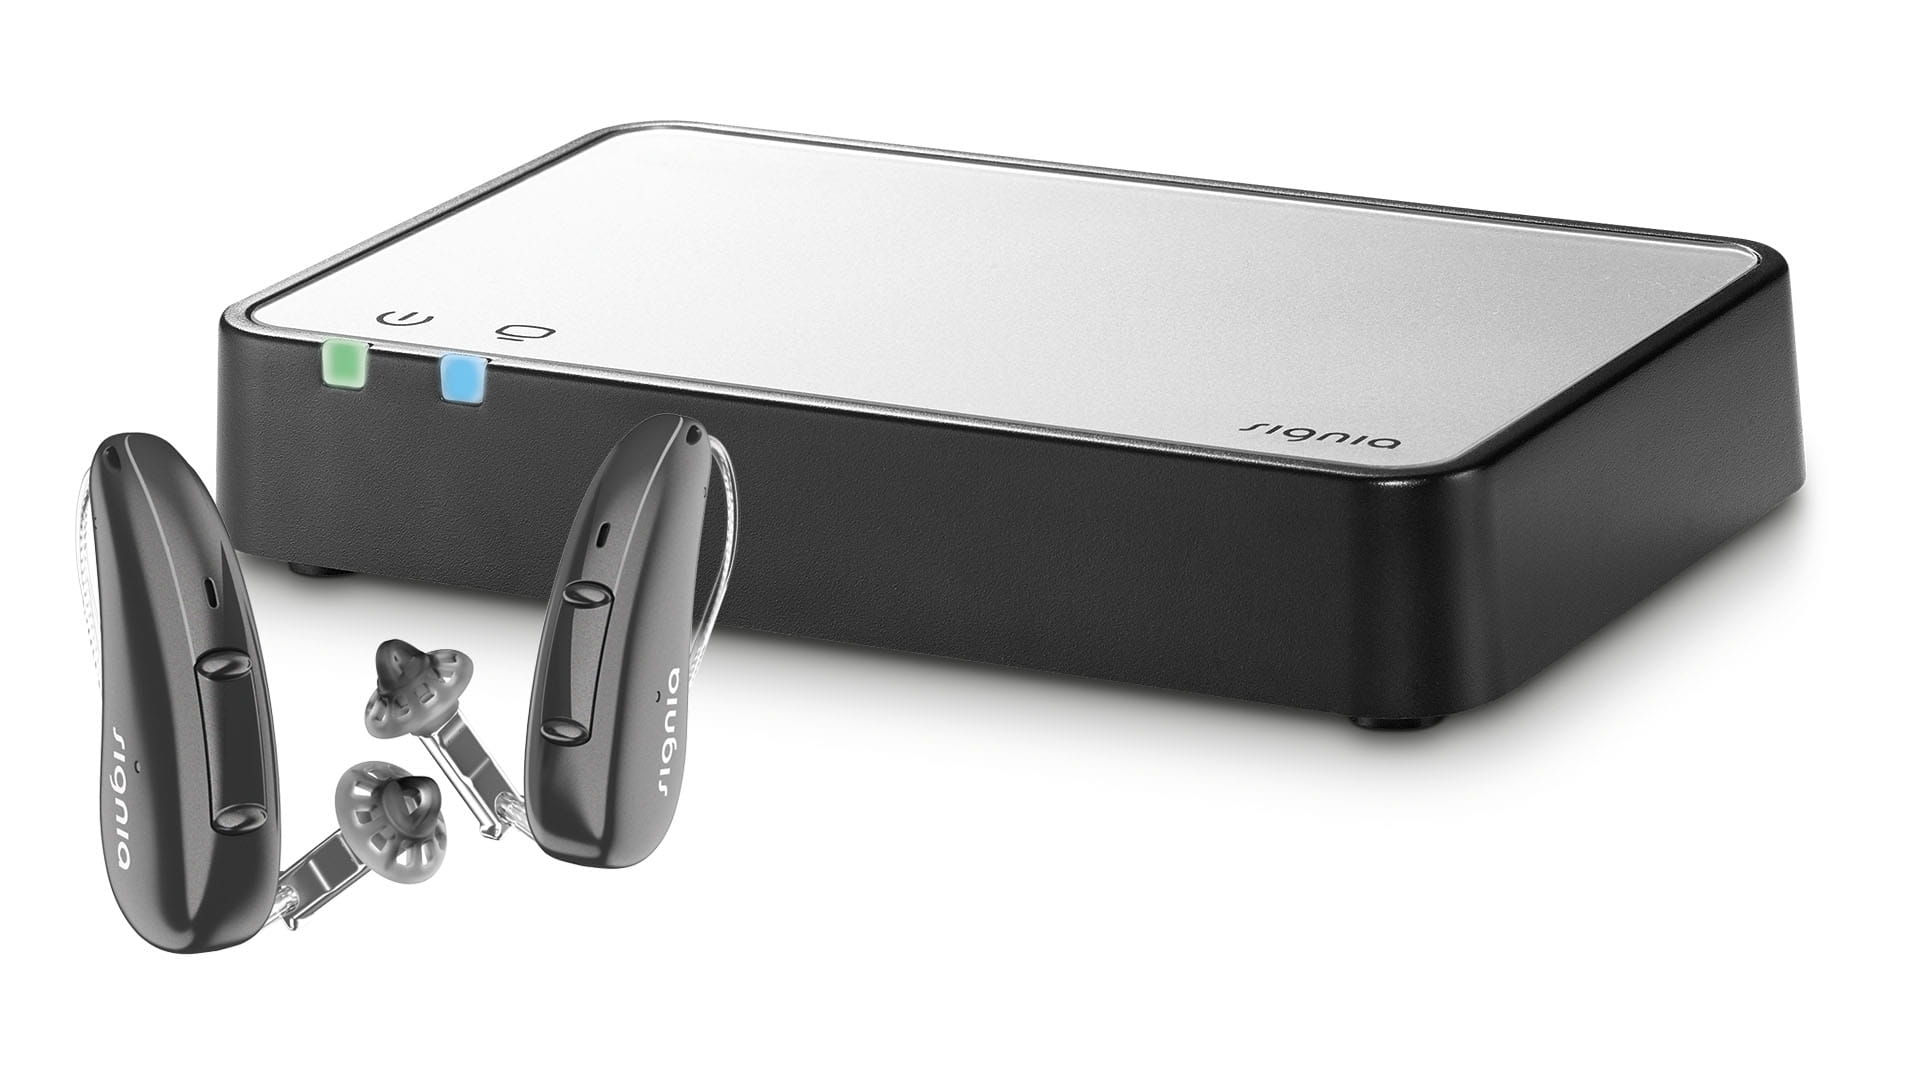 StreamLine TV with Pure Charge&Go AX